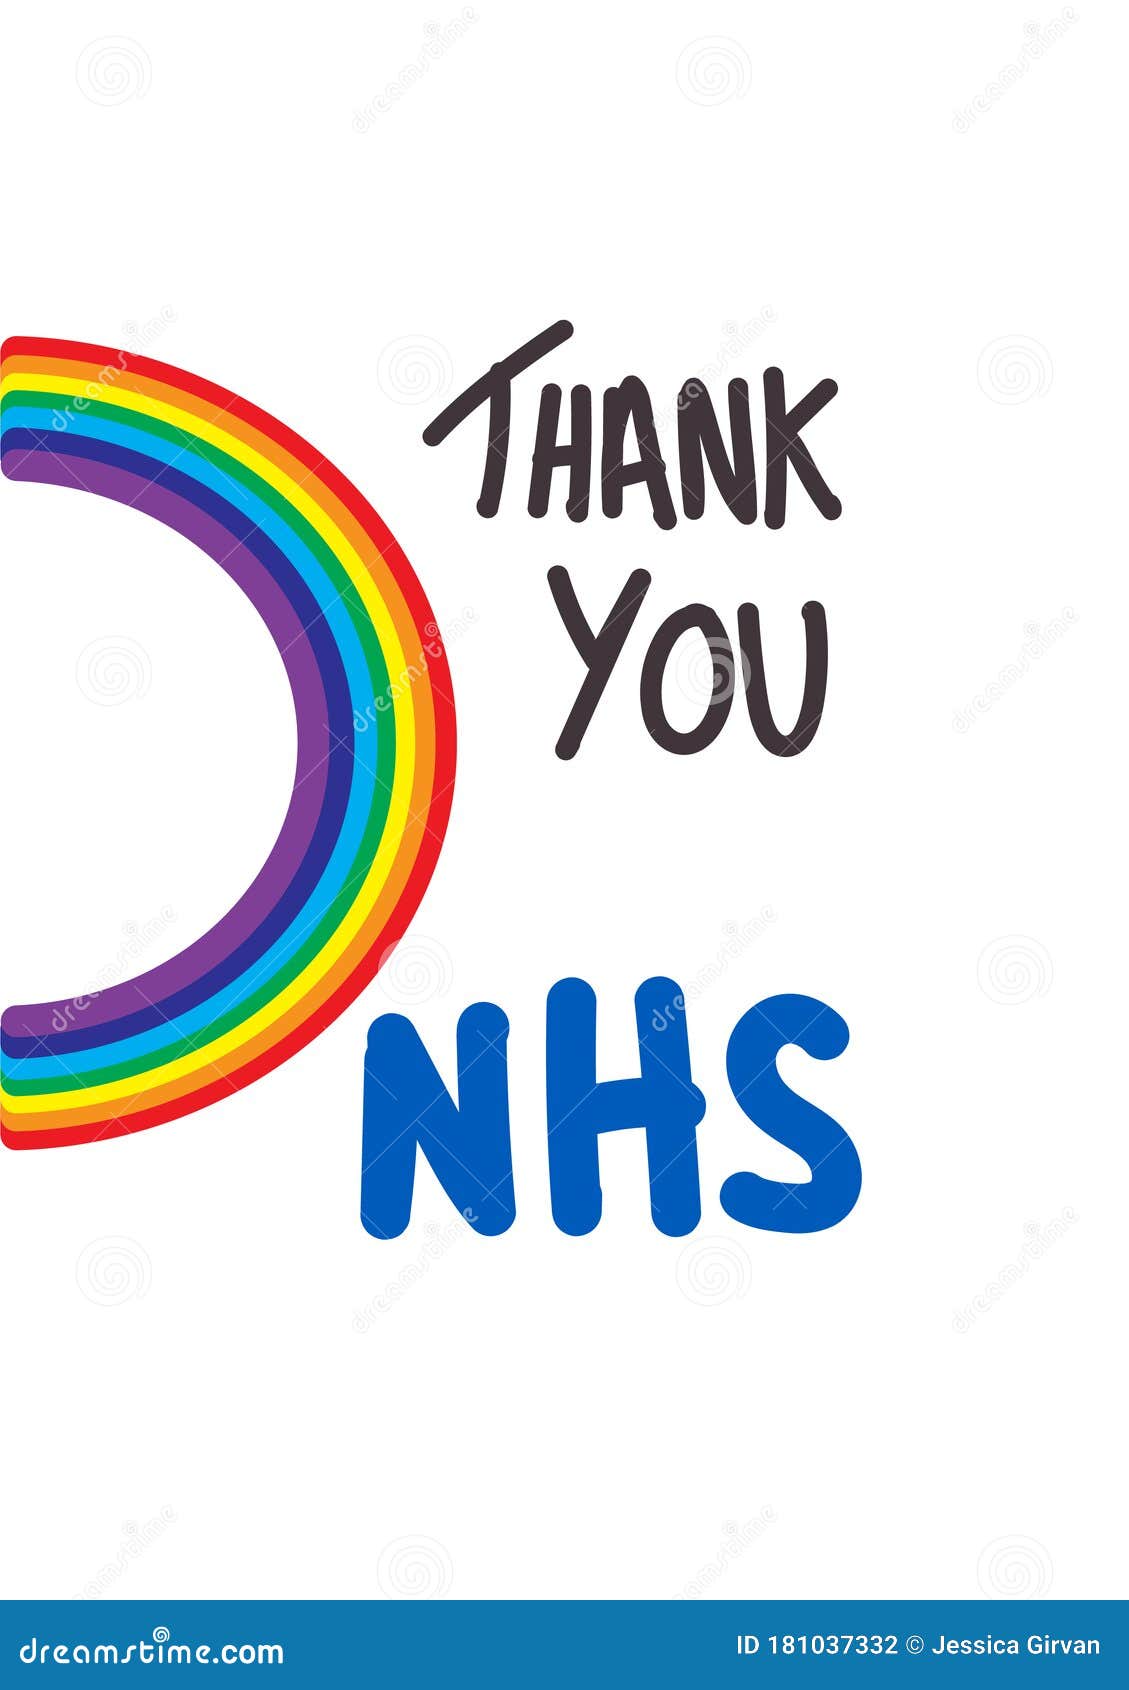 thank you nhs rainbow picture stock vector illustration